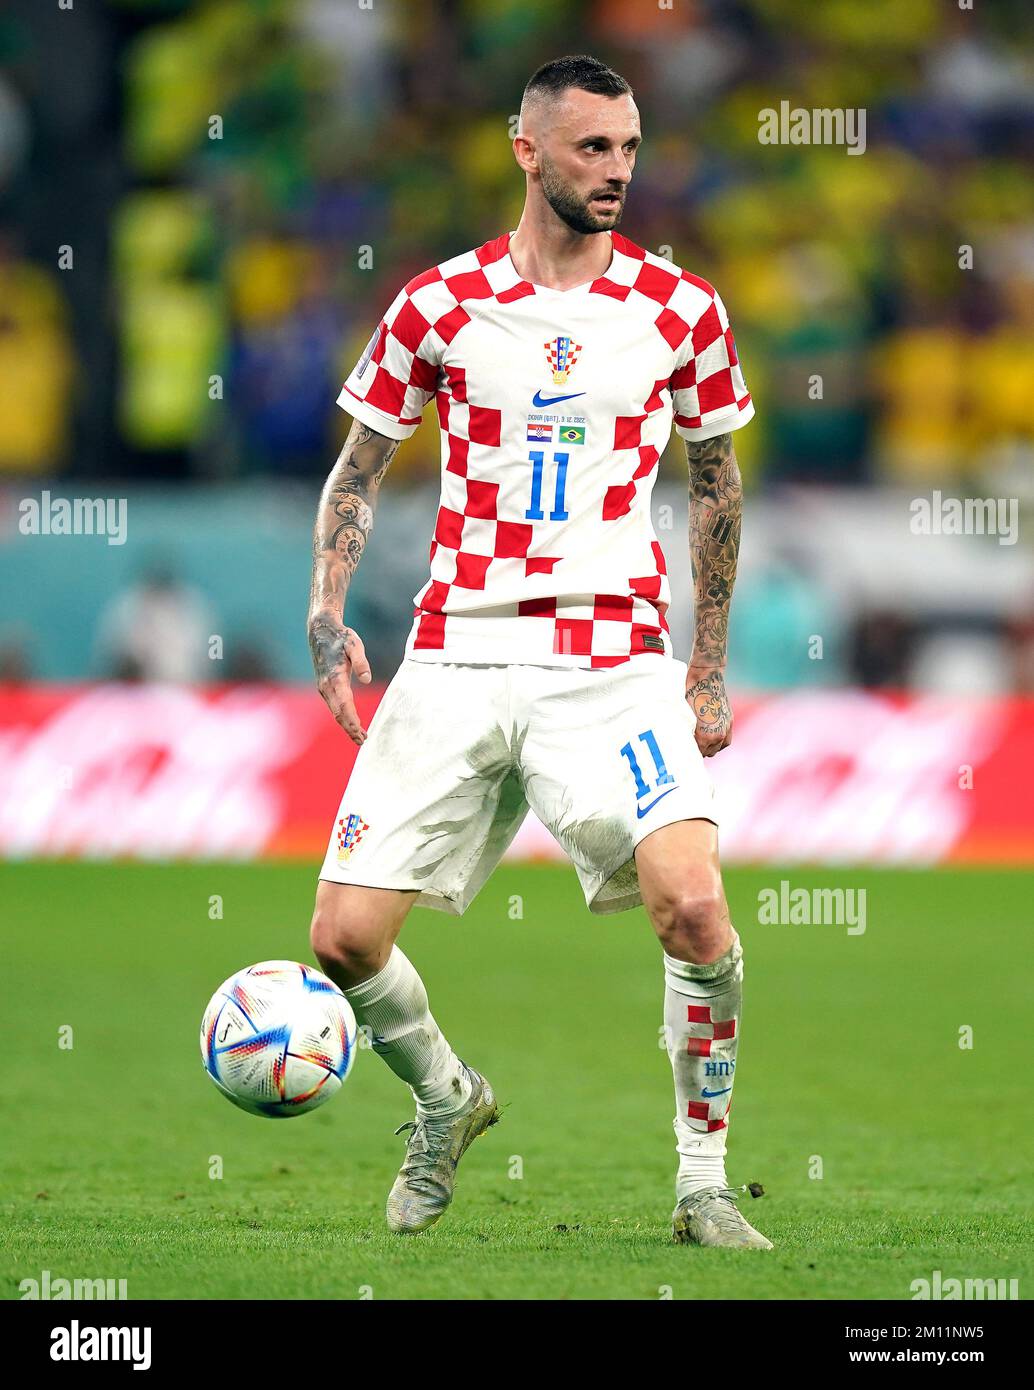 Croatia's Marcelo Brozovic in action during the FIFA World Cup Quarter-Final match at the Education City Stadium in Al Rayyan, Qatar. Picture date: Friday December 9, 2022. Stock Photo